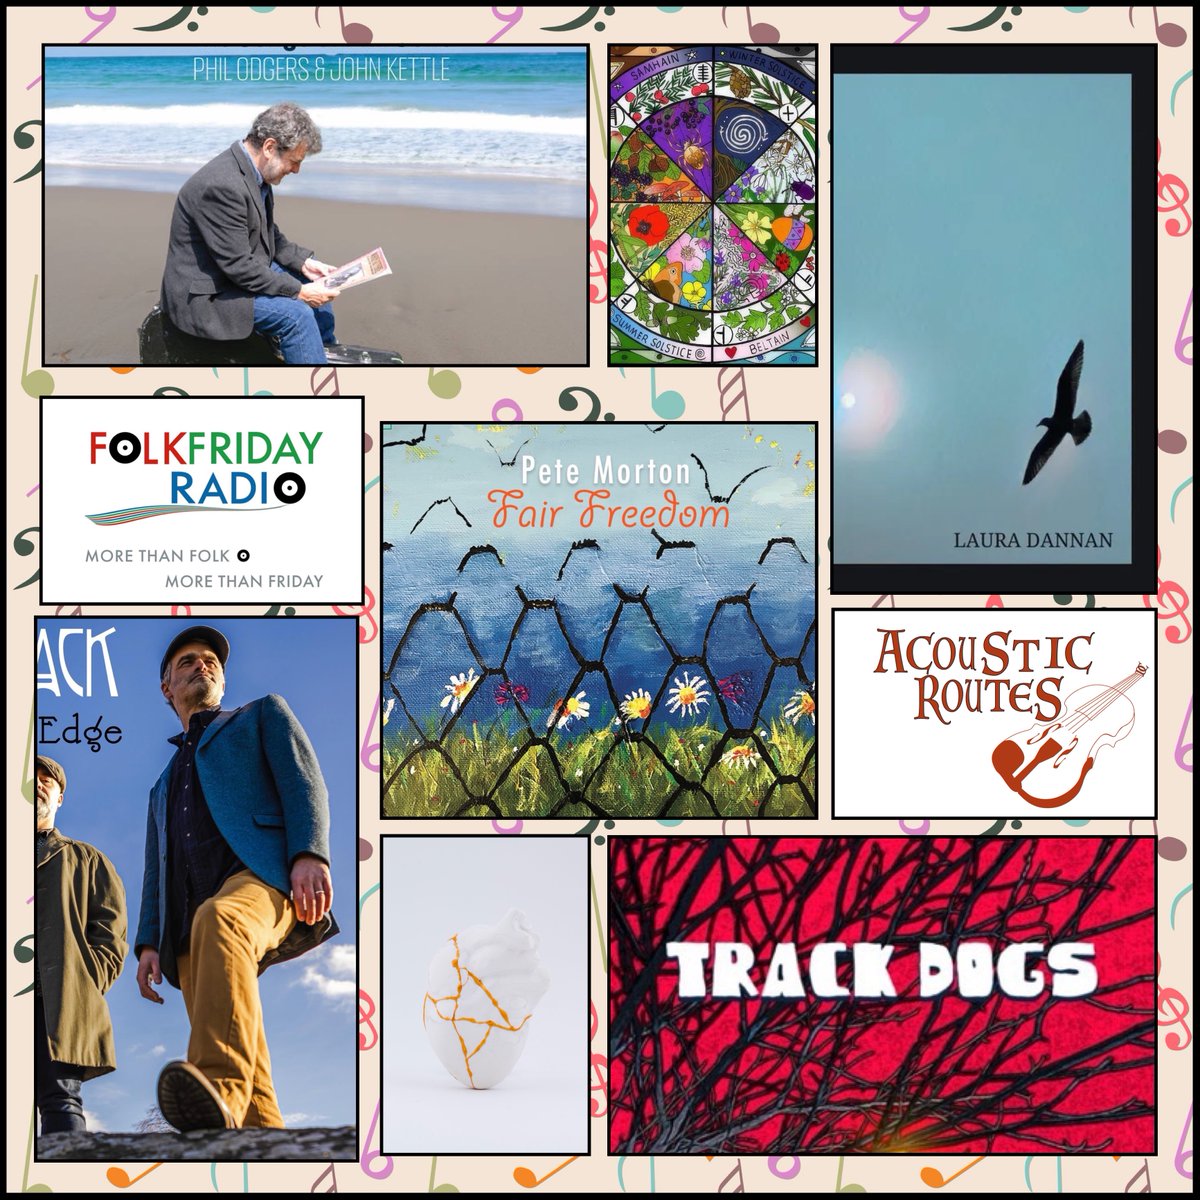 On this week’s @AcousticRoutes, show 493, the featured album is from @petemortonmusic & there will be music from @TangleJackBand @lauradannan @smalltownjones @TheCooleysBand @TrackDogsMusic @SwillOdgers @FaunOfficial and more. Tune in to @folkfridayradio 12pm U.K. time Sunday